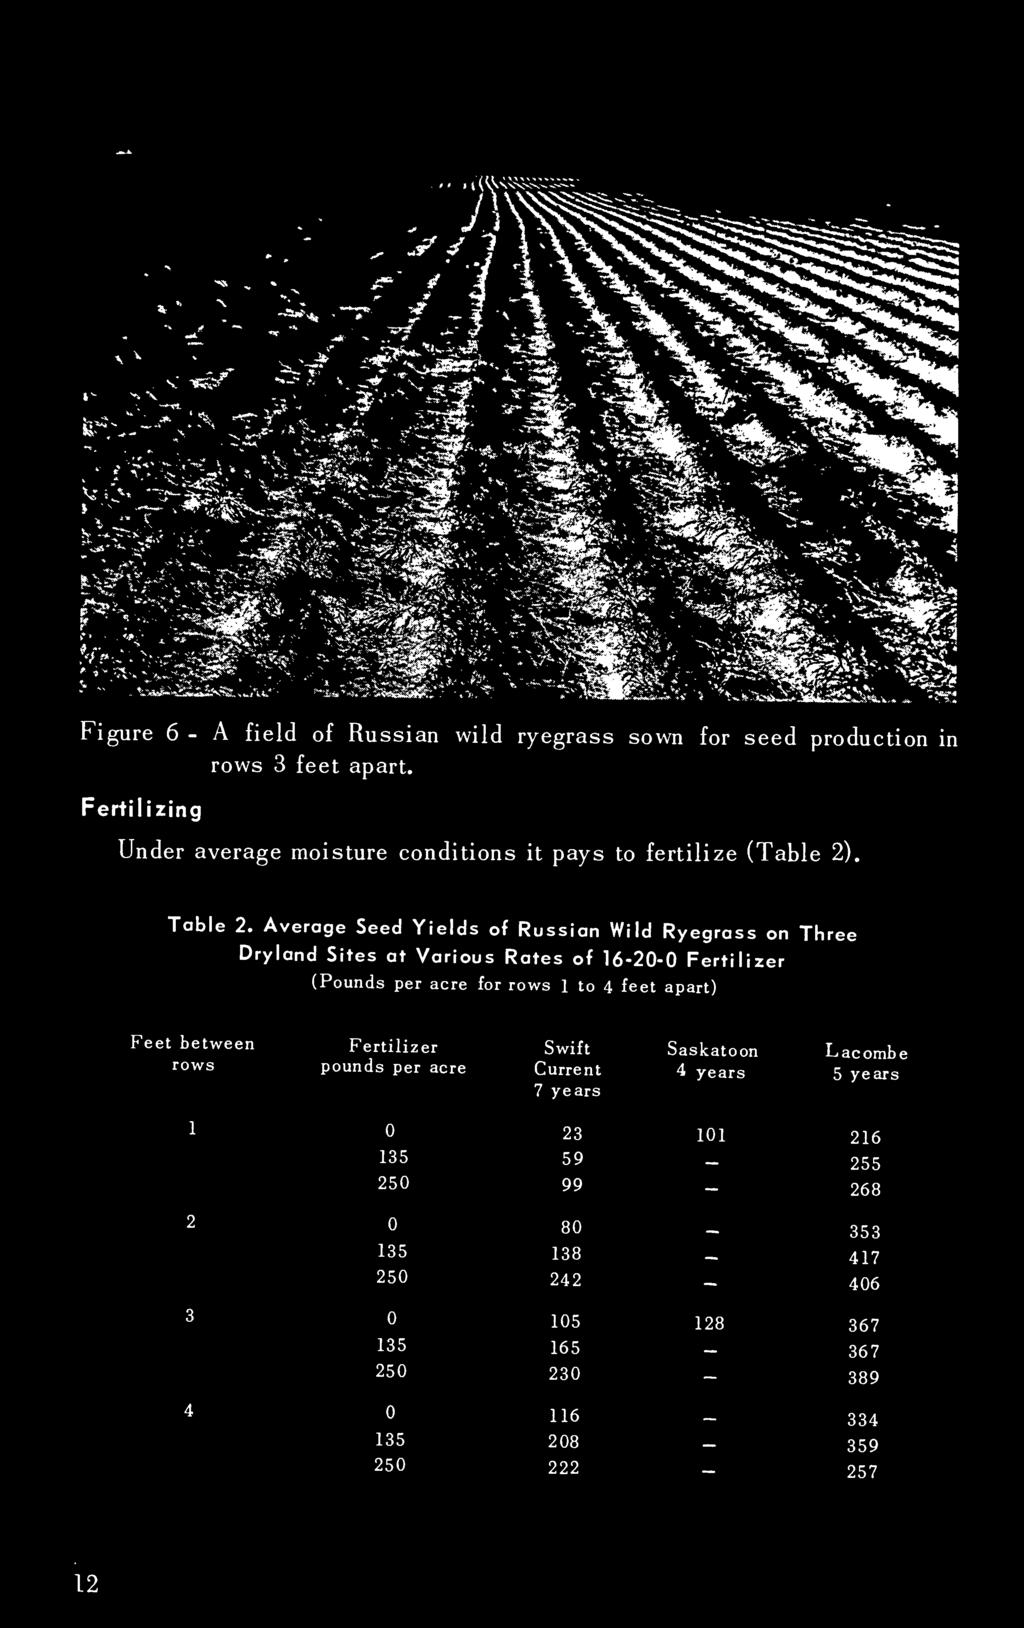 Lacombe rows pounds per acre Current 4 years 5 years 7 years 1 23 101 216 135 59 255 250 99-268